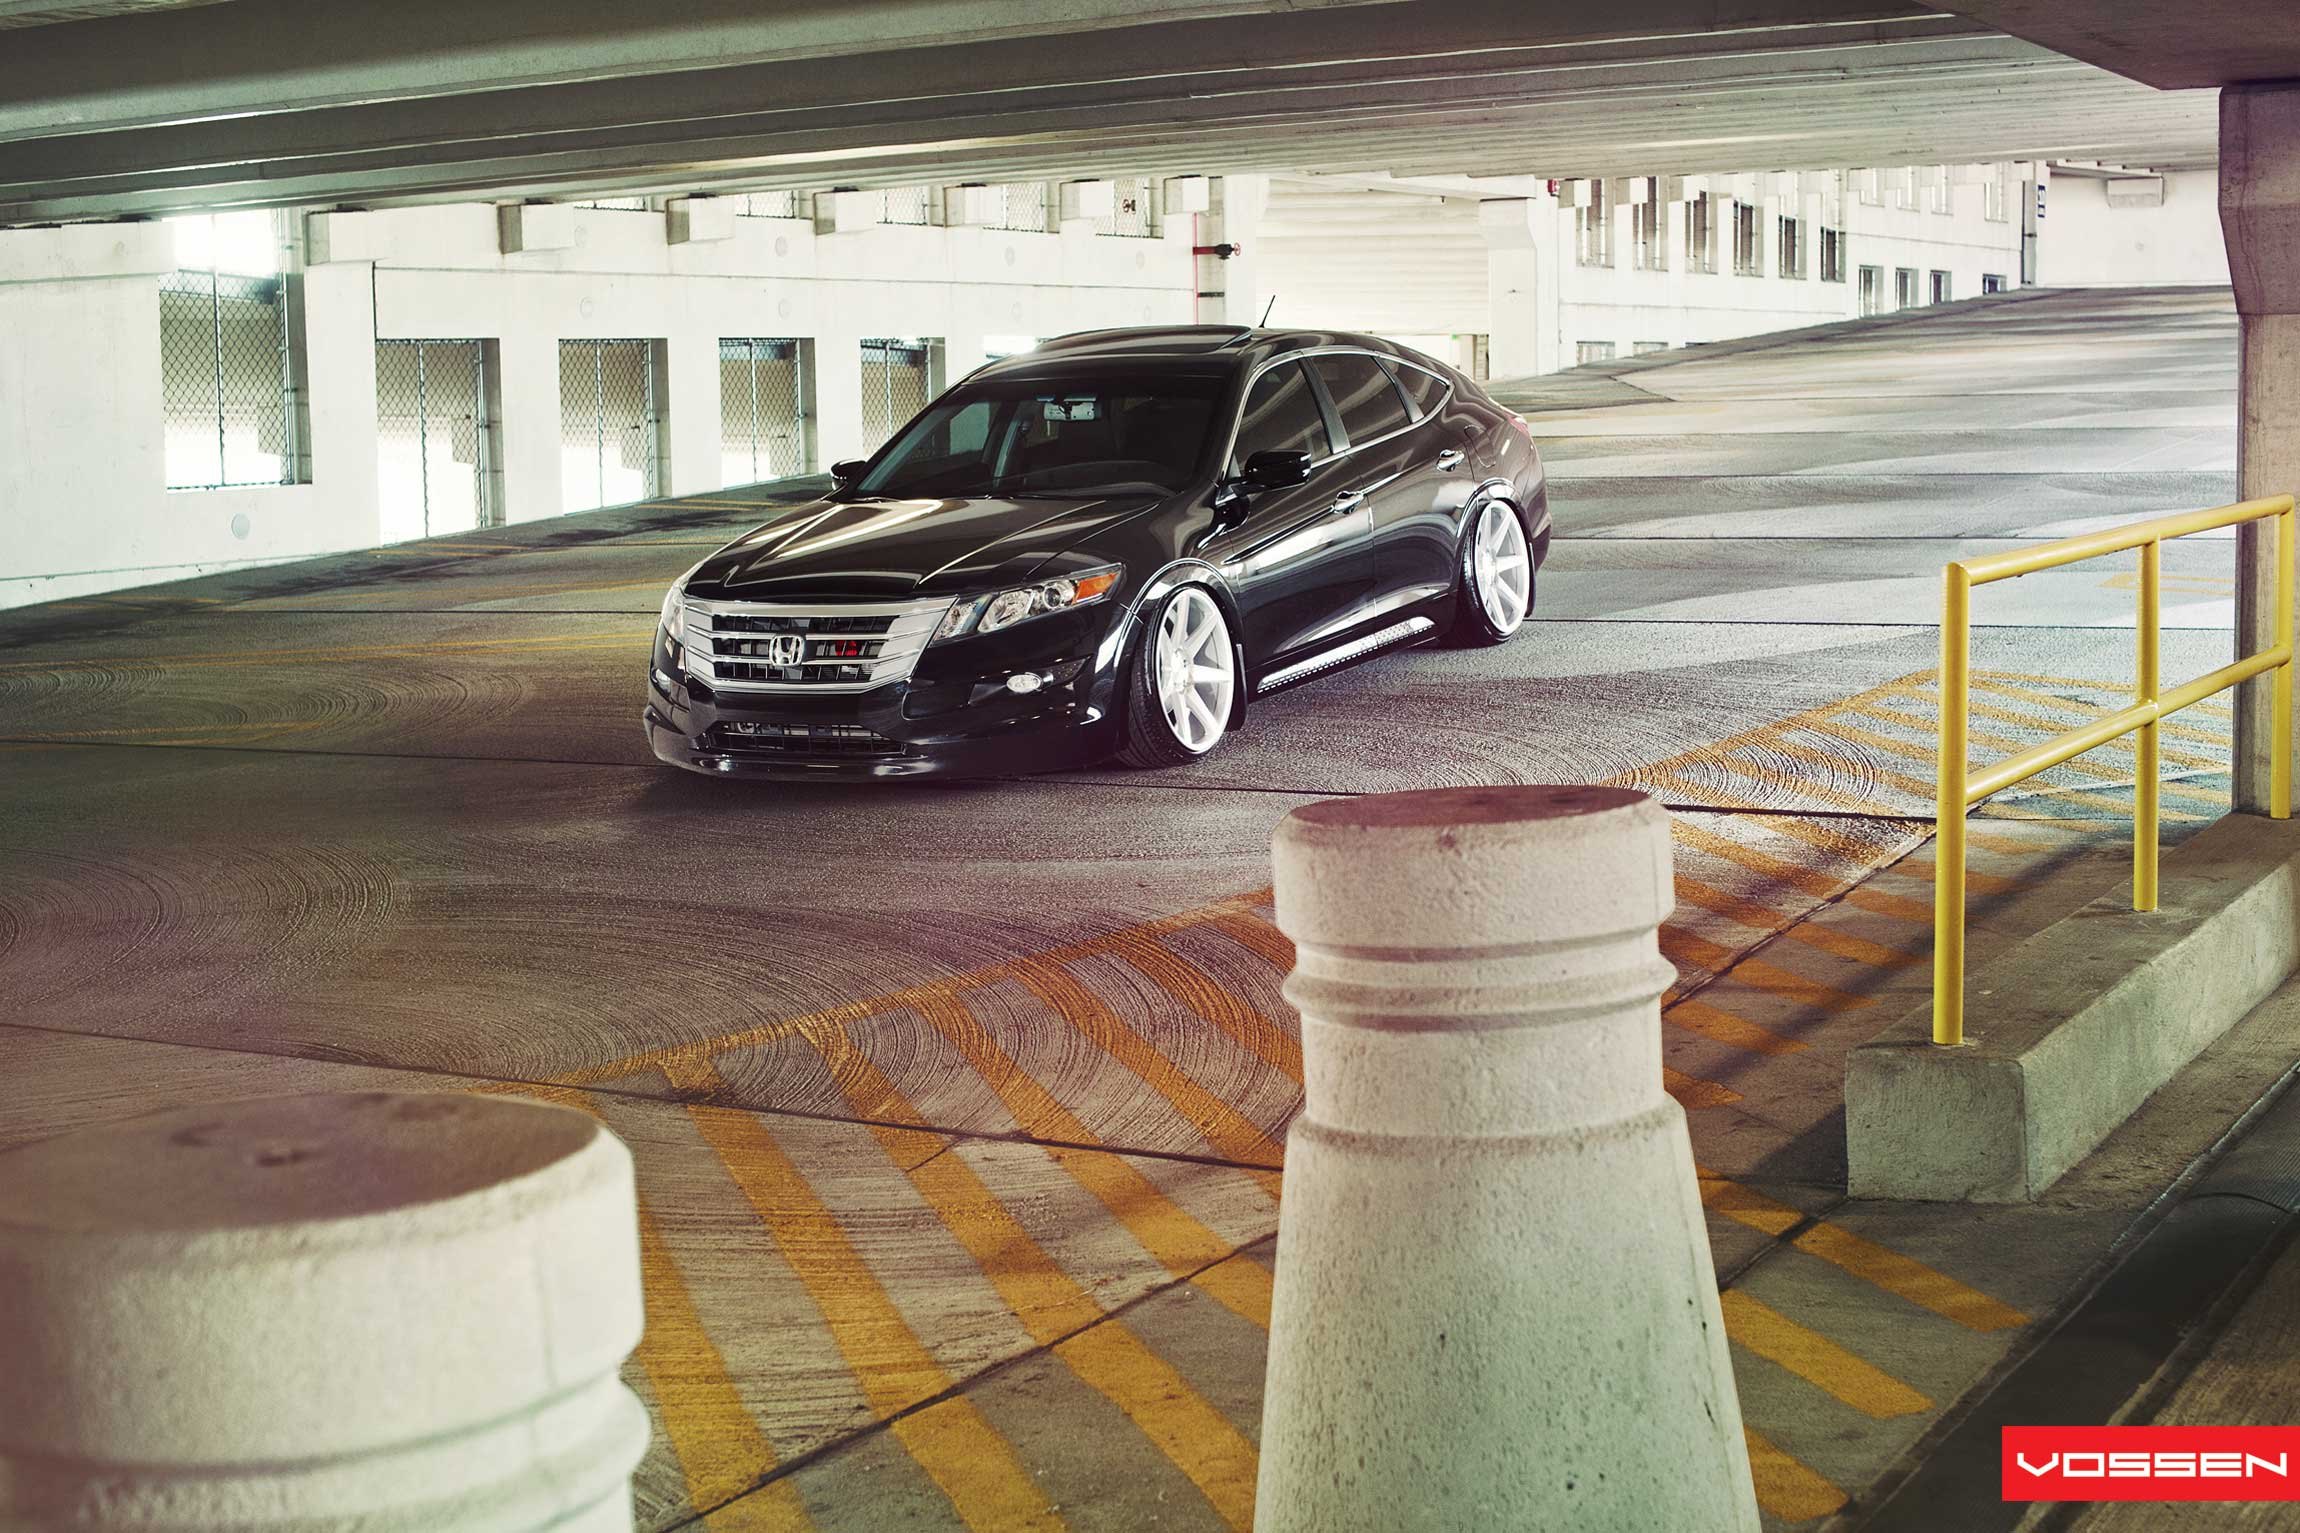 Black Honda Crosstour with Aftermarket Front Bumper - Photo by Vossen